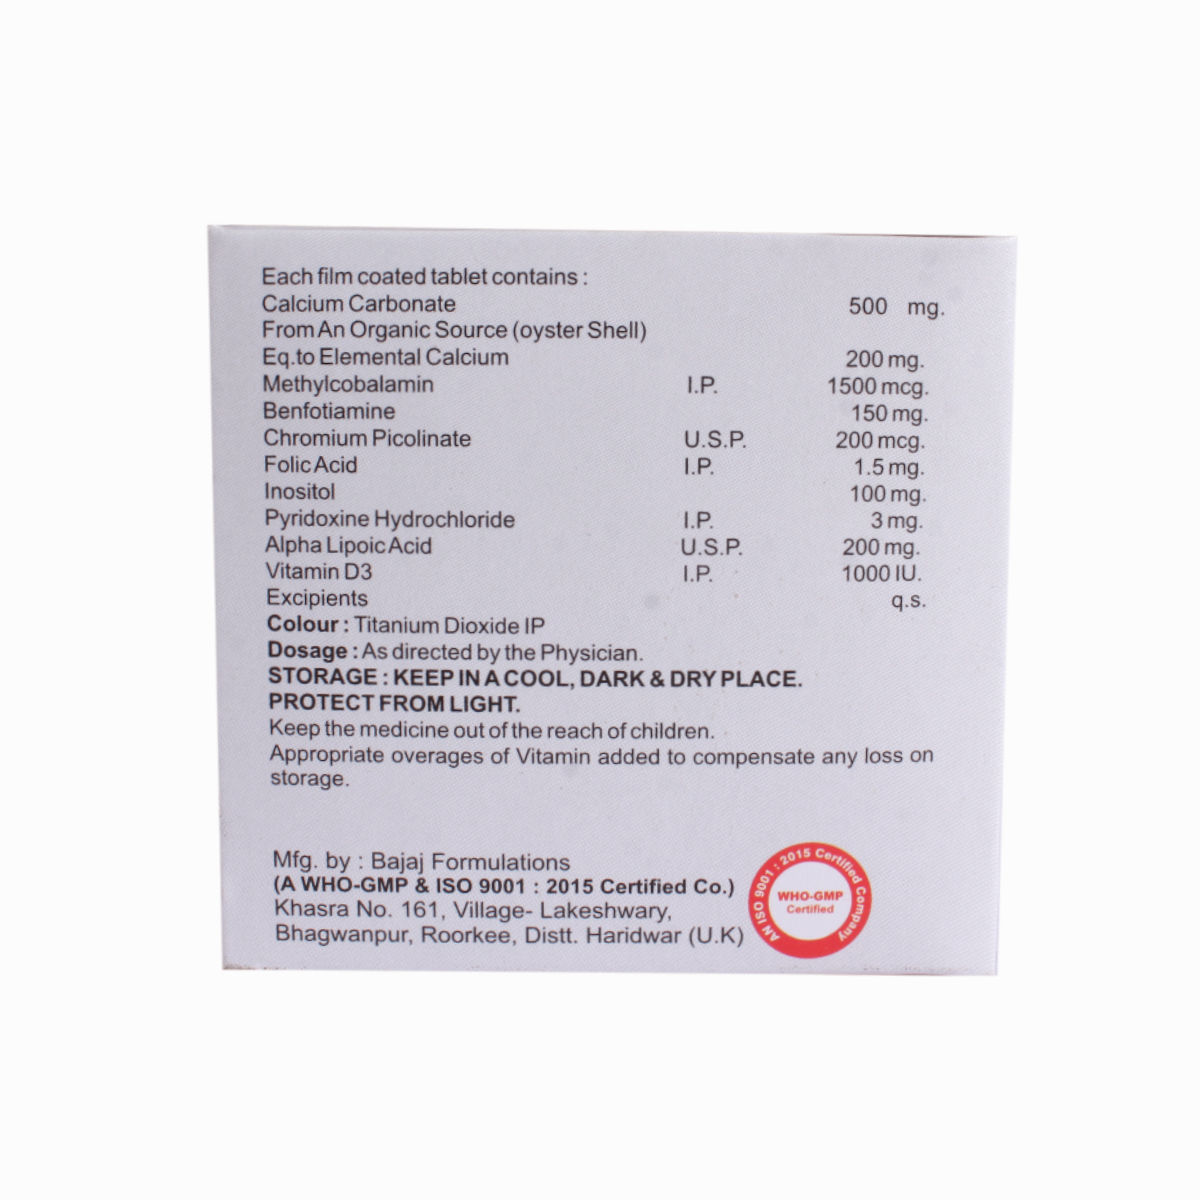 Zakson Cd3 Tablet 10'S Price, Uses, Side Effects, Composition - Apollo ...